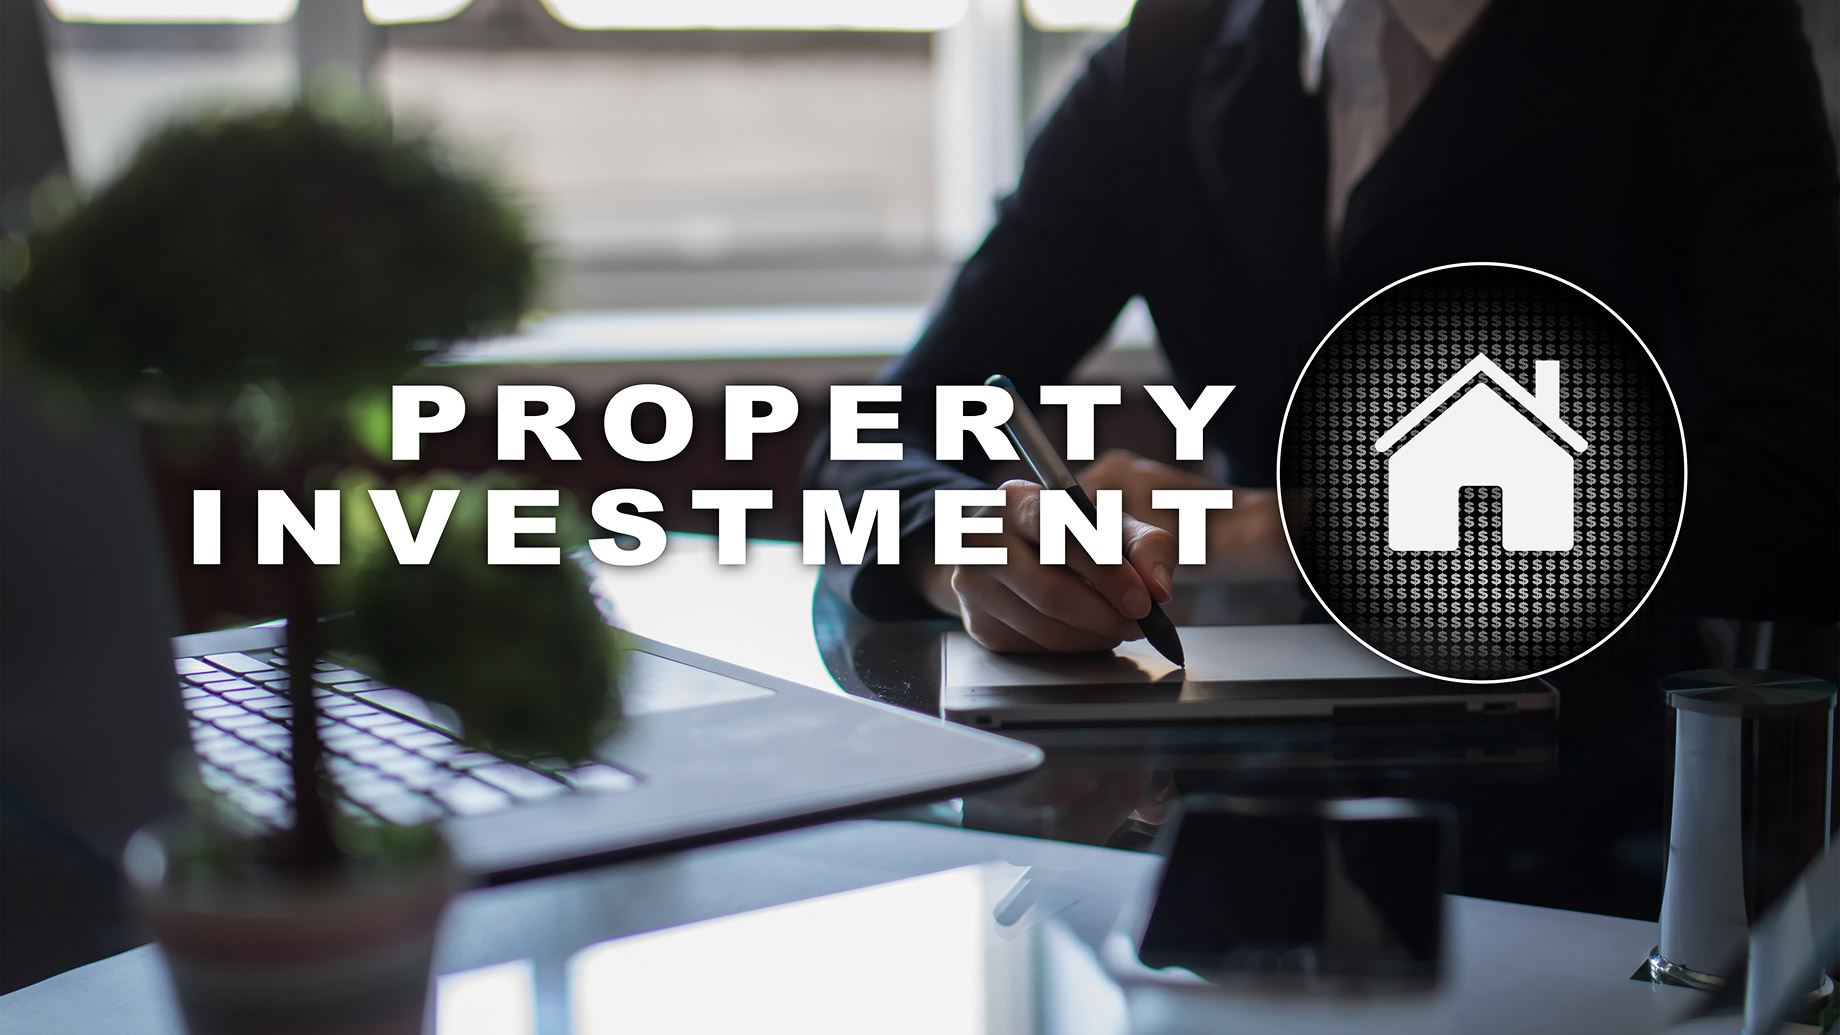 4 Things You Need To Consider When Buying Investment Properties